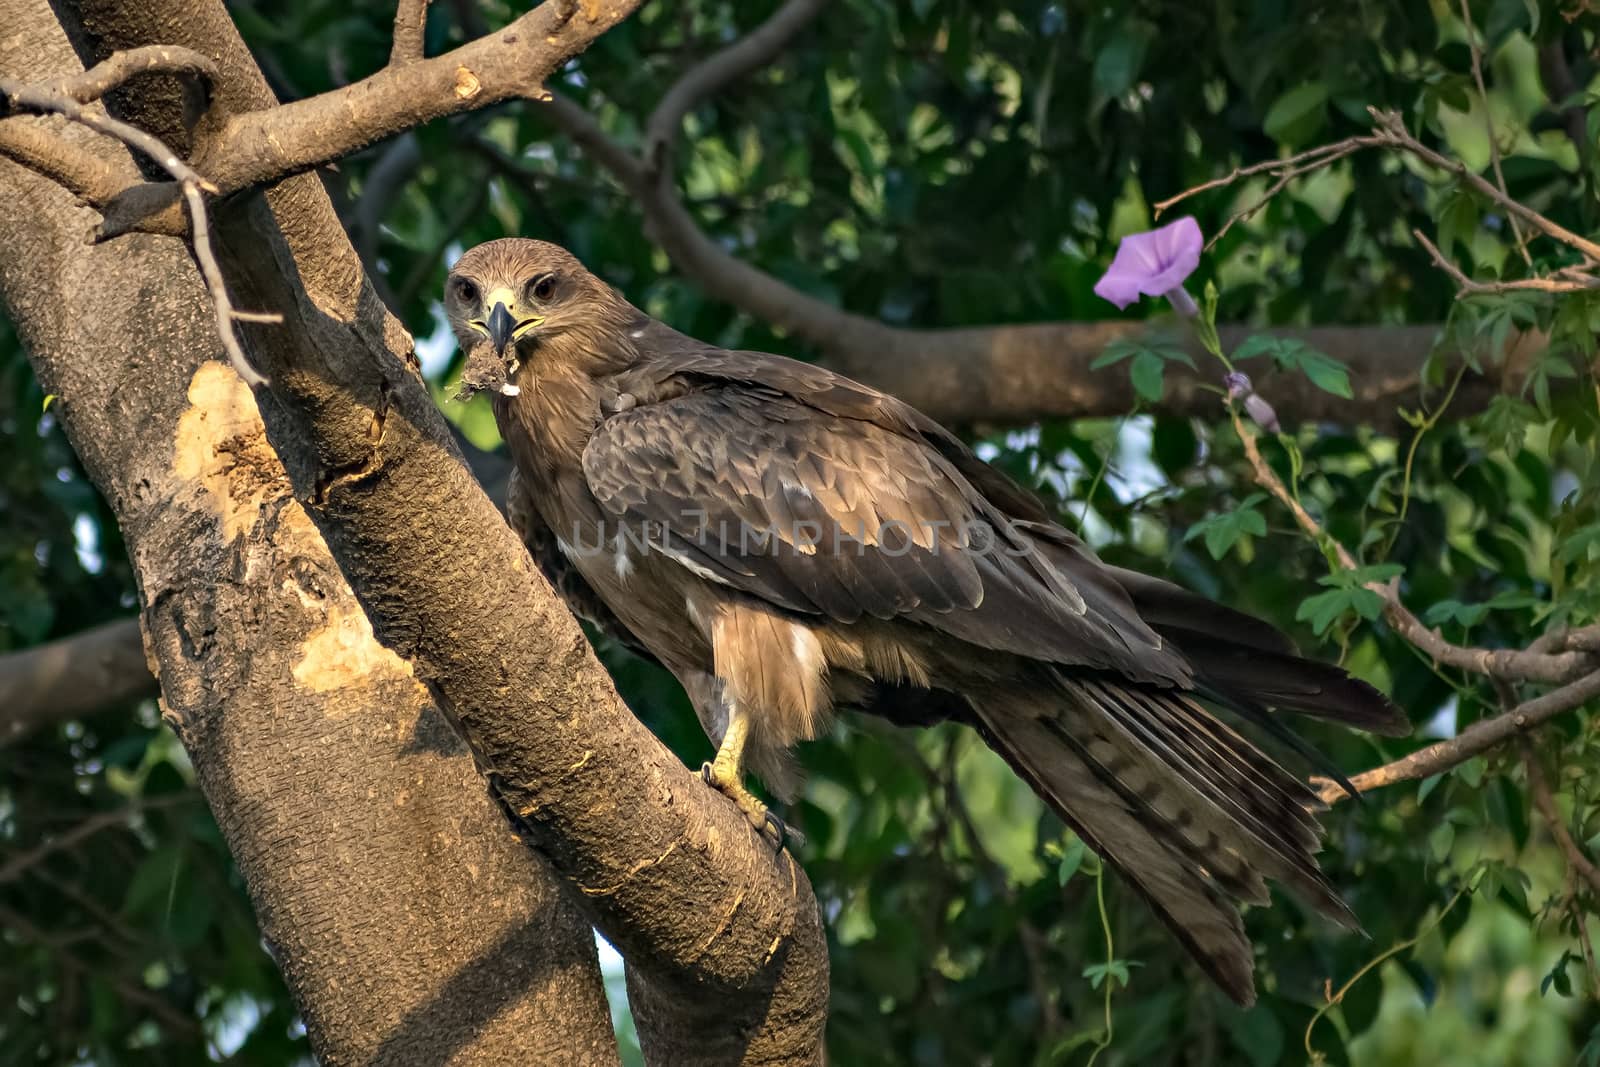 Black kite bird with food sitting in leaves on top of tree.The black kite (Milvus migrans) is a medium-sized bird of prey in the family Accipitridae, which also includes many other diurnal raptors.